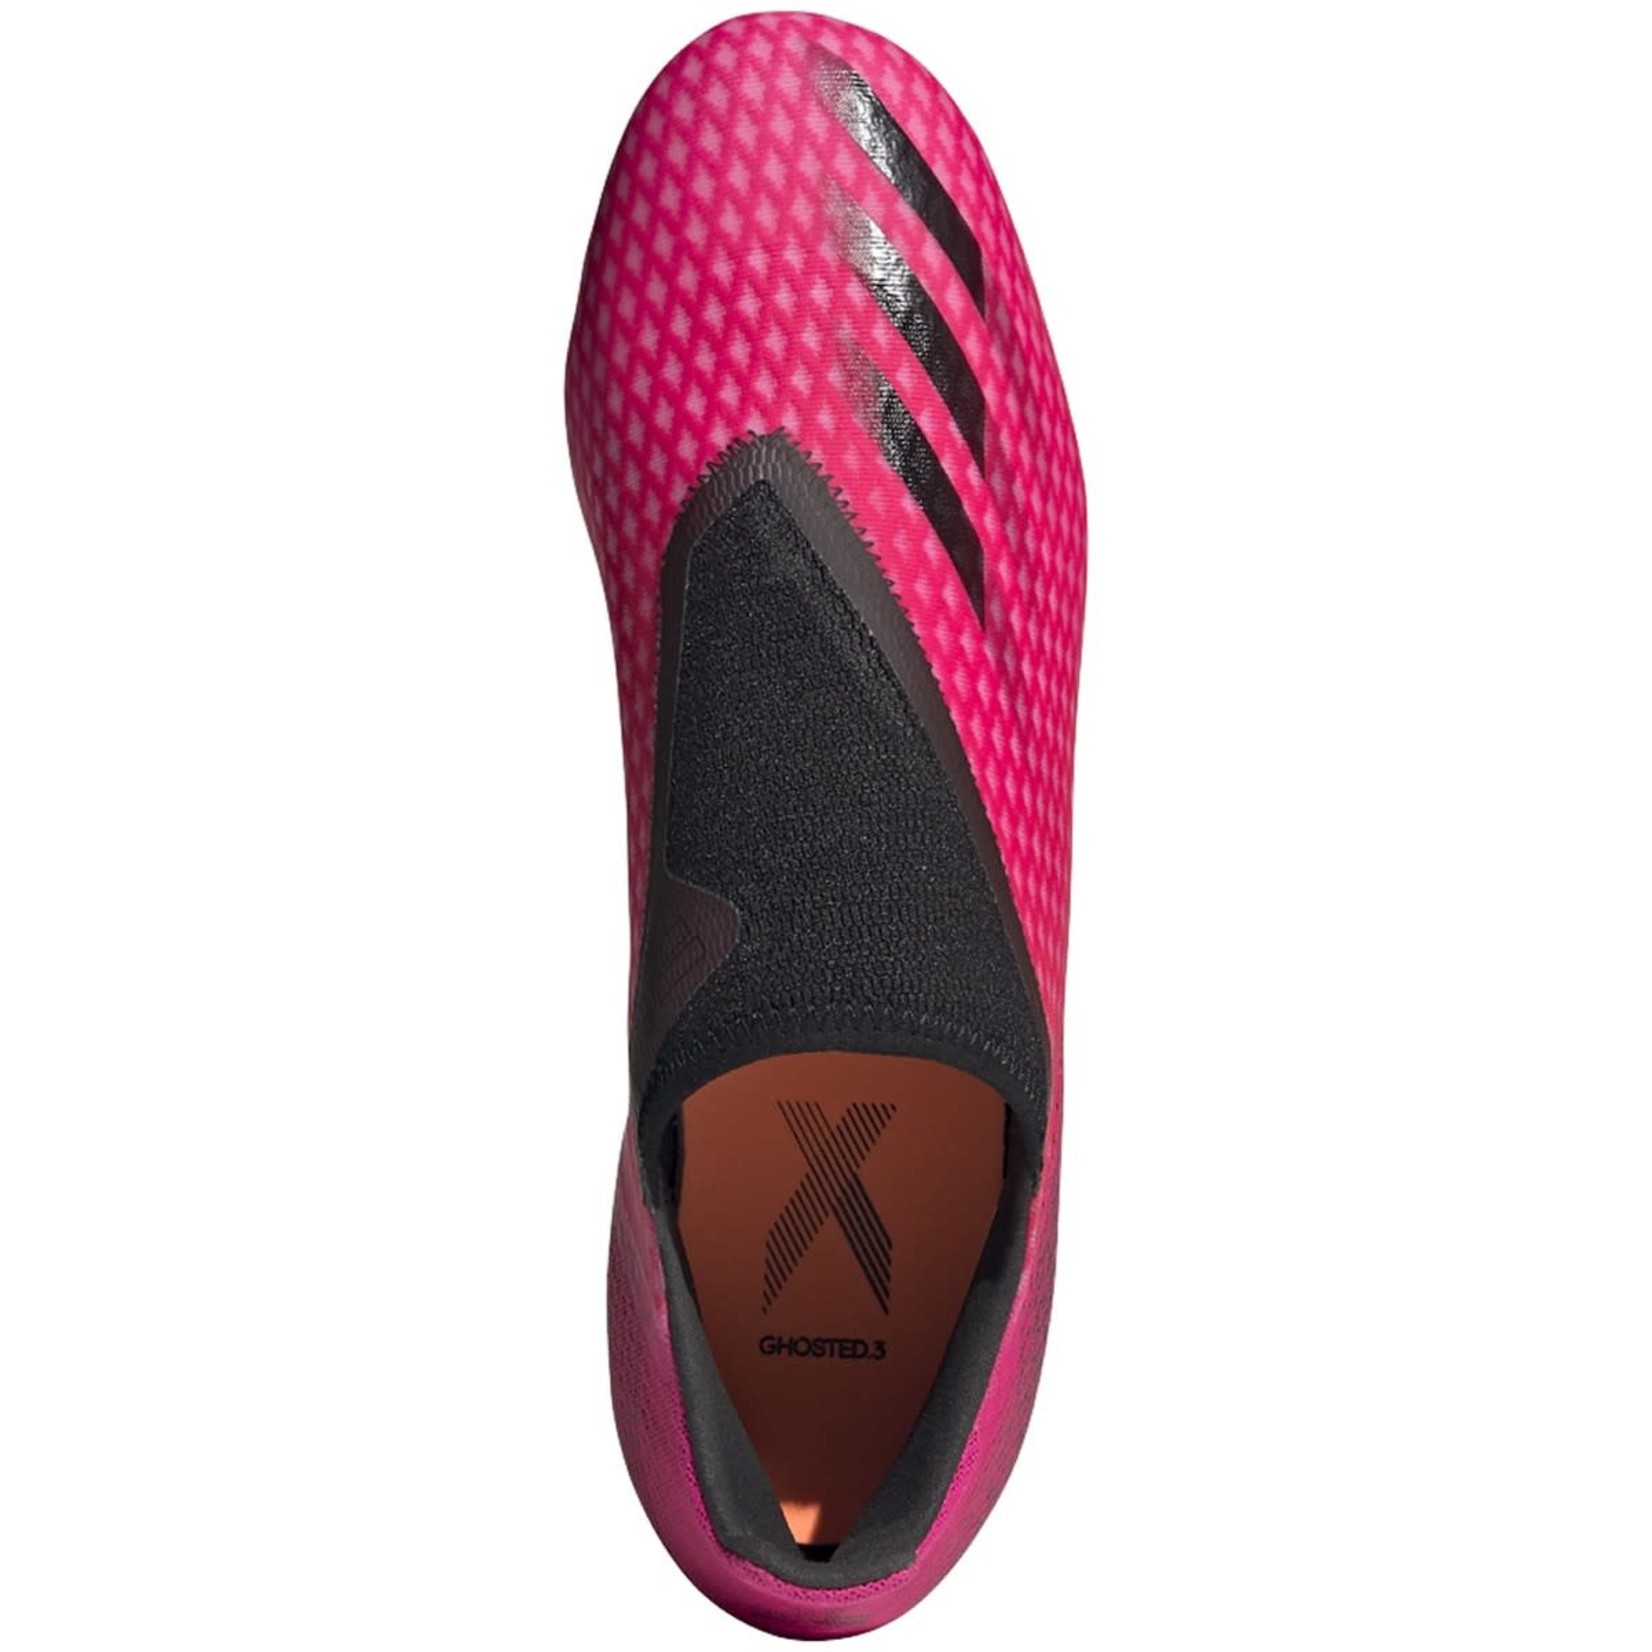 ADIDAS X GHOSTED.3 LACELESS FG (PINK/BLACK)